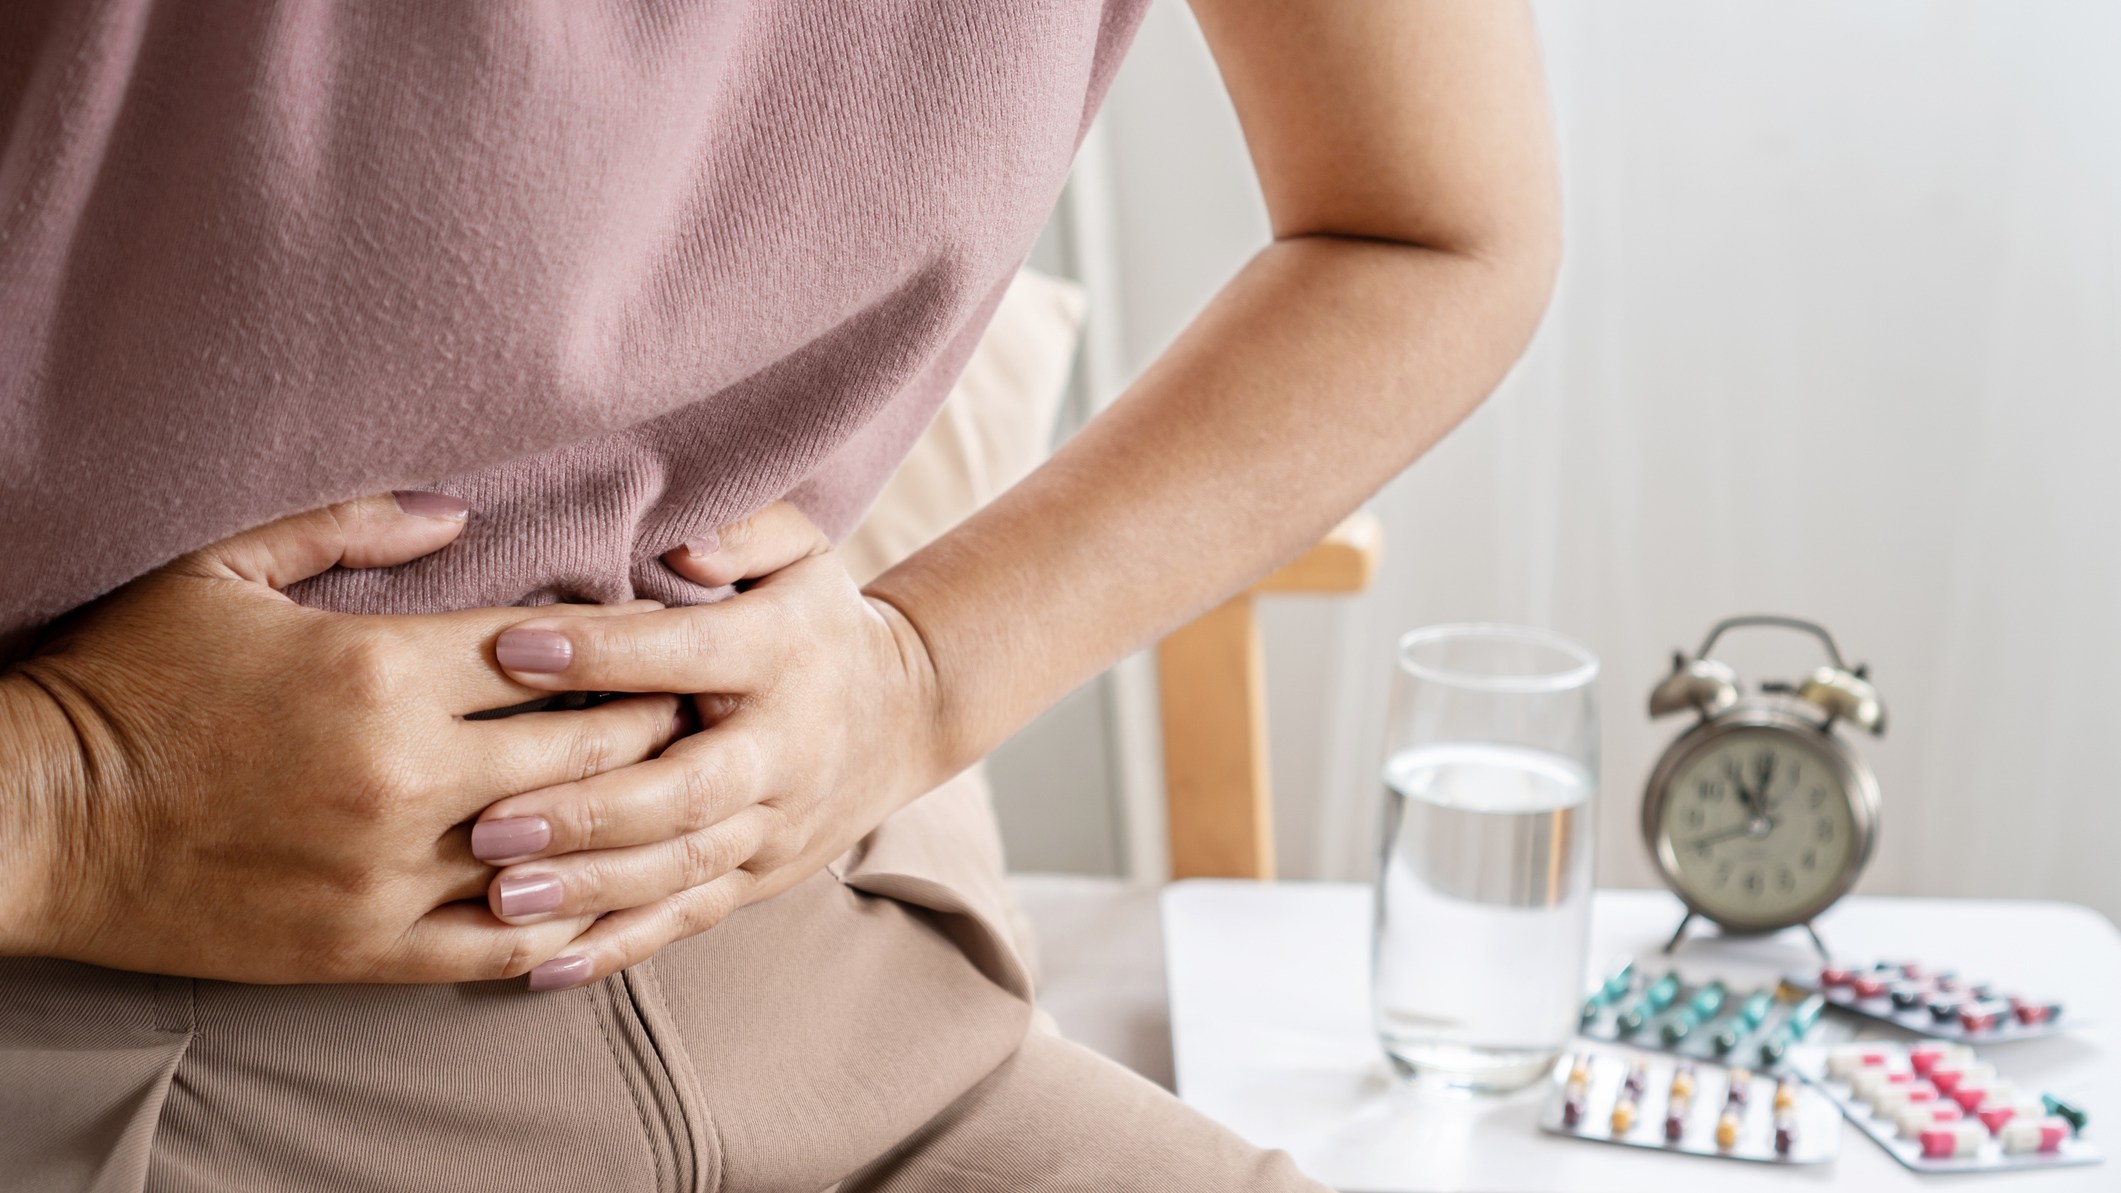 About  half a million people in the UK have inflammatory bowel disease, the two main forms of which are Crohn’s disease and ulcerative colitis